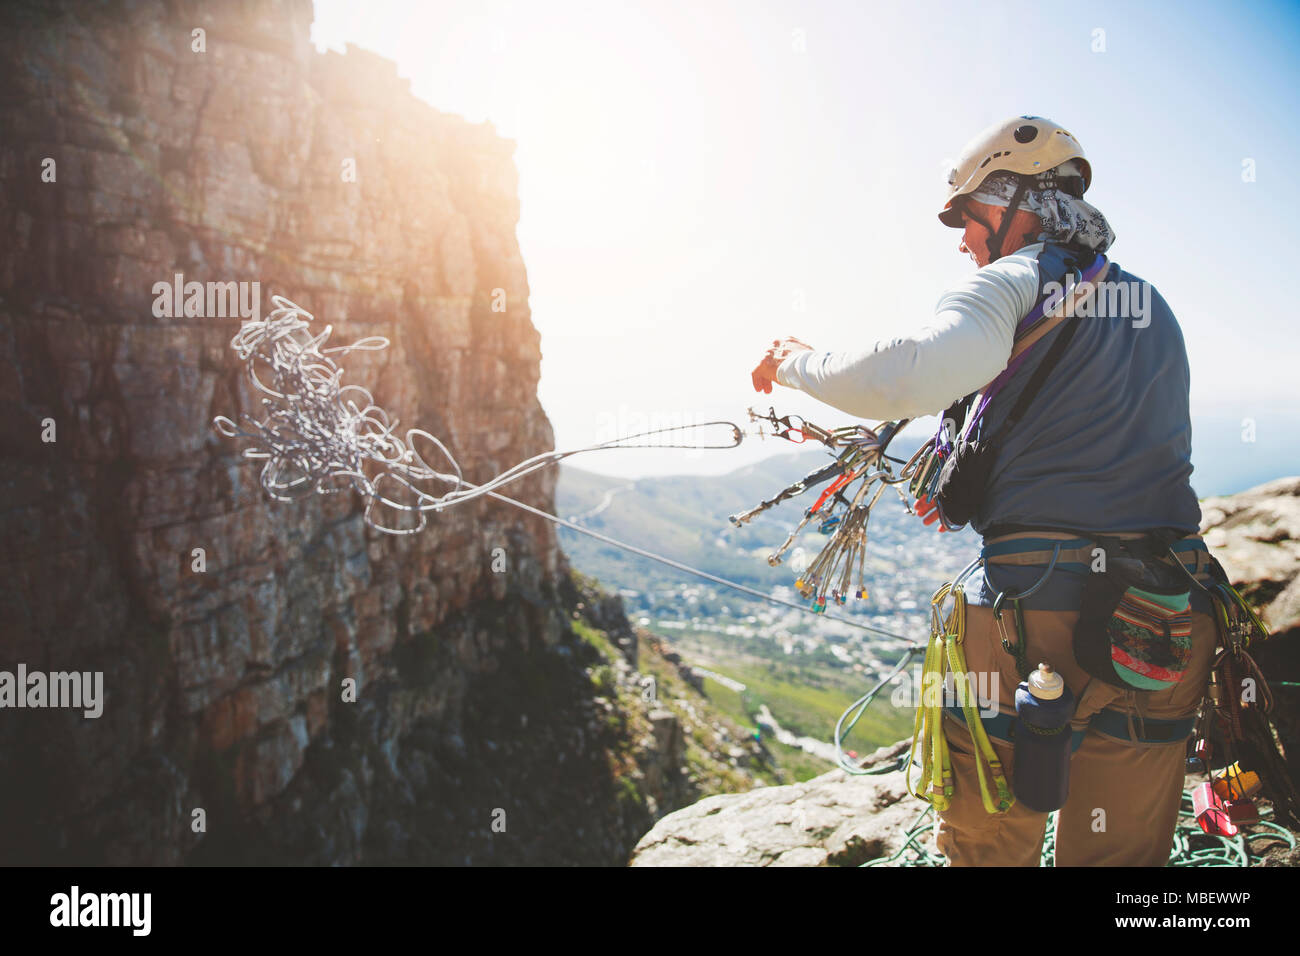 Male rock climber throwing rope Stock Photo